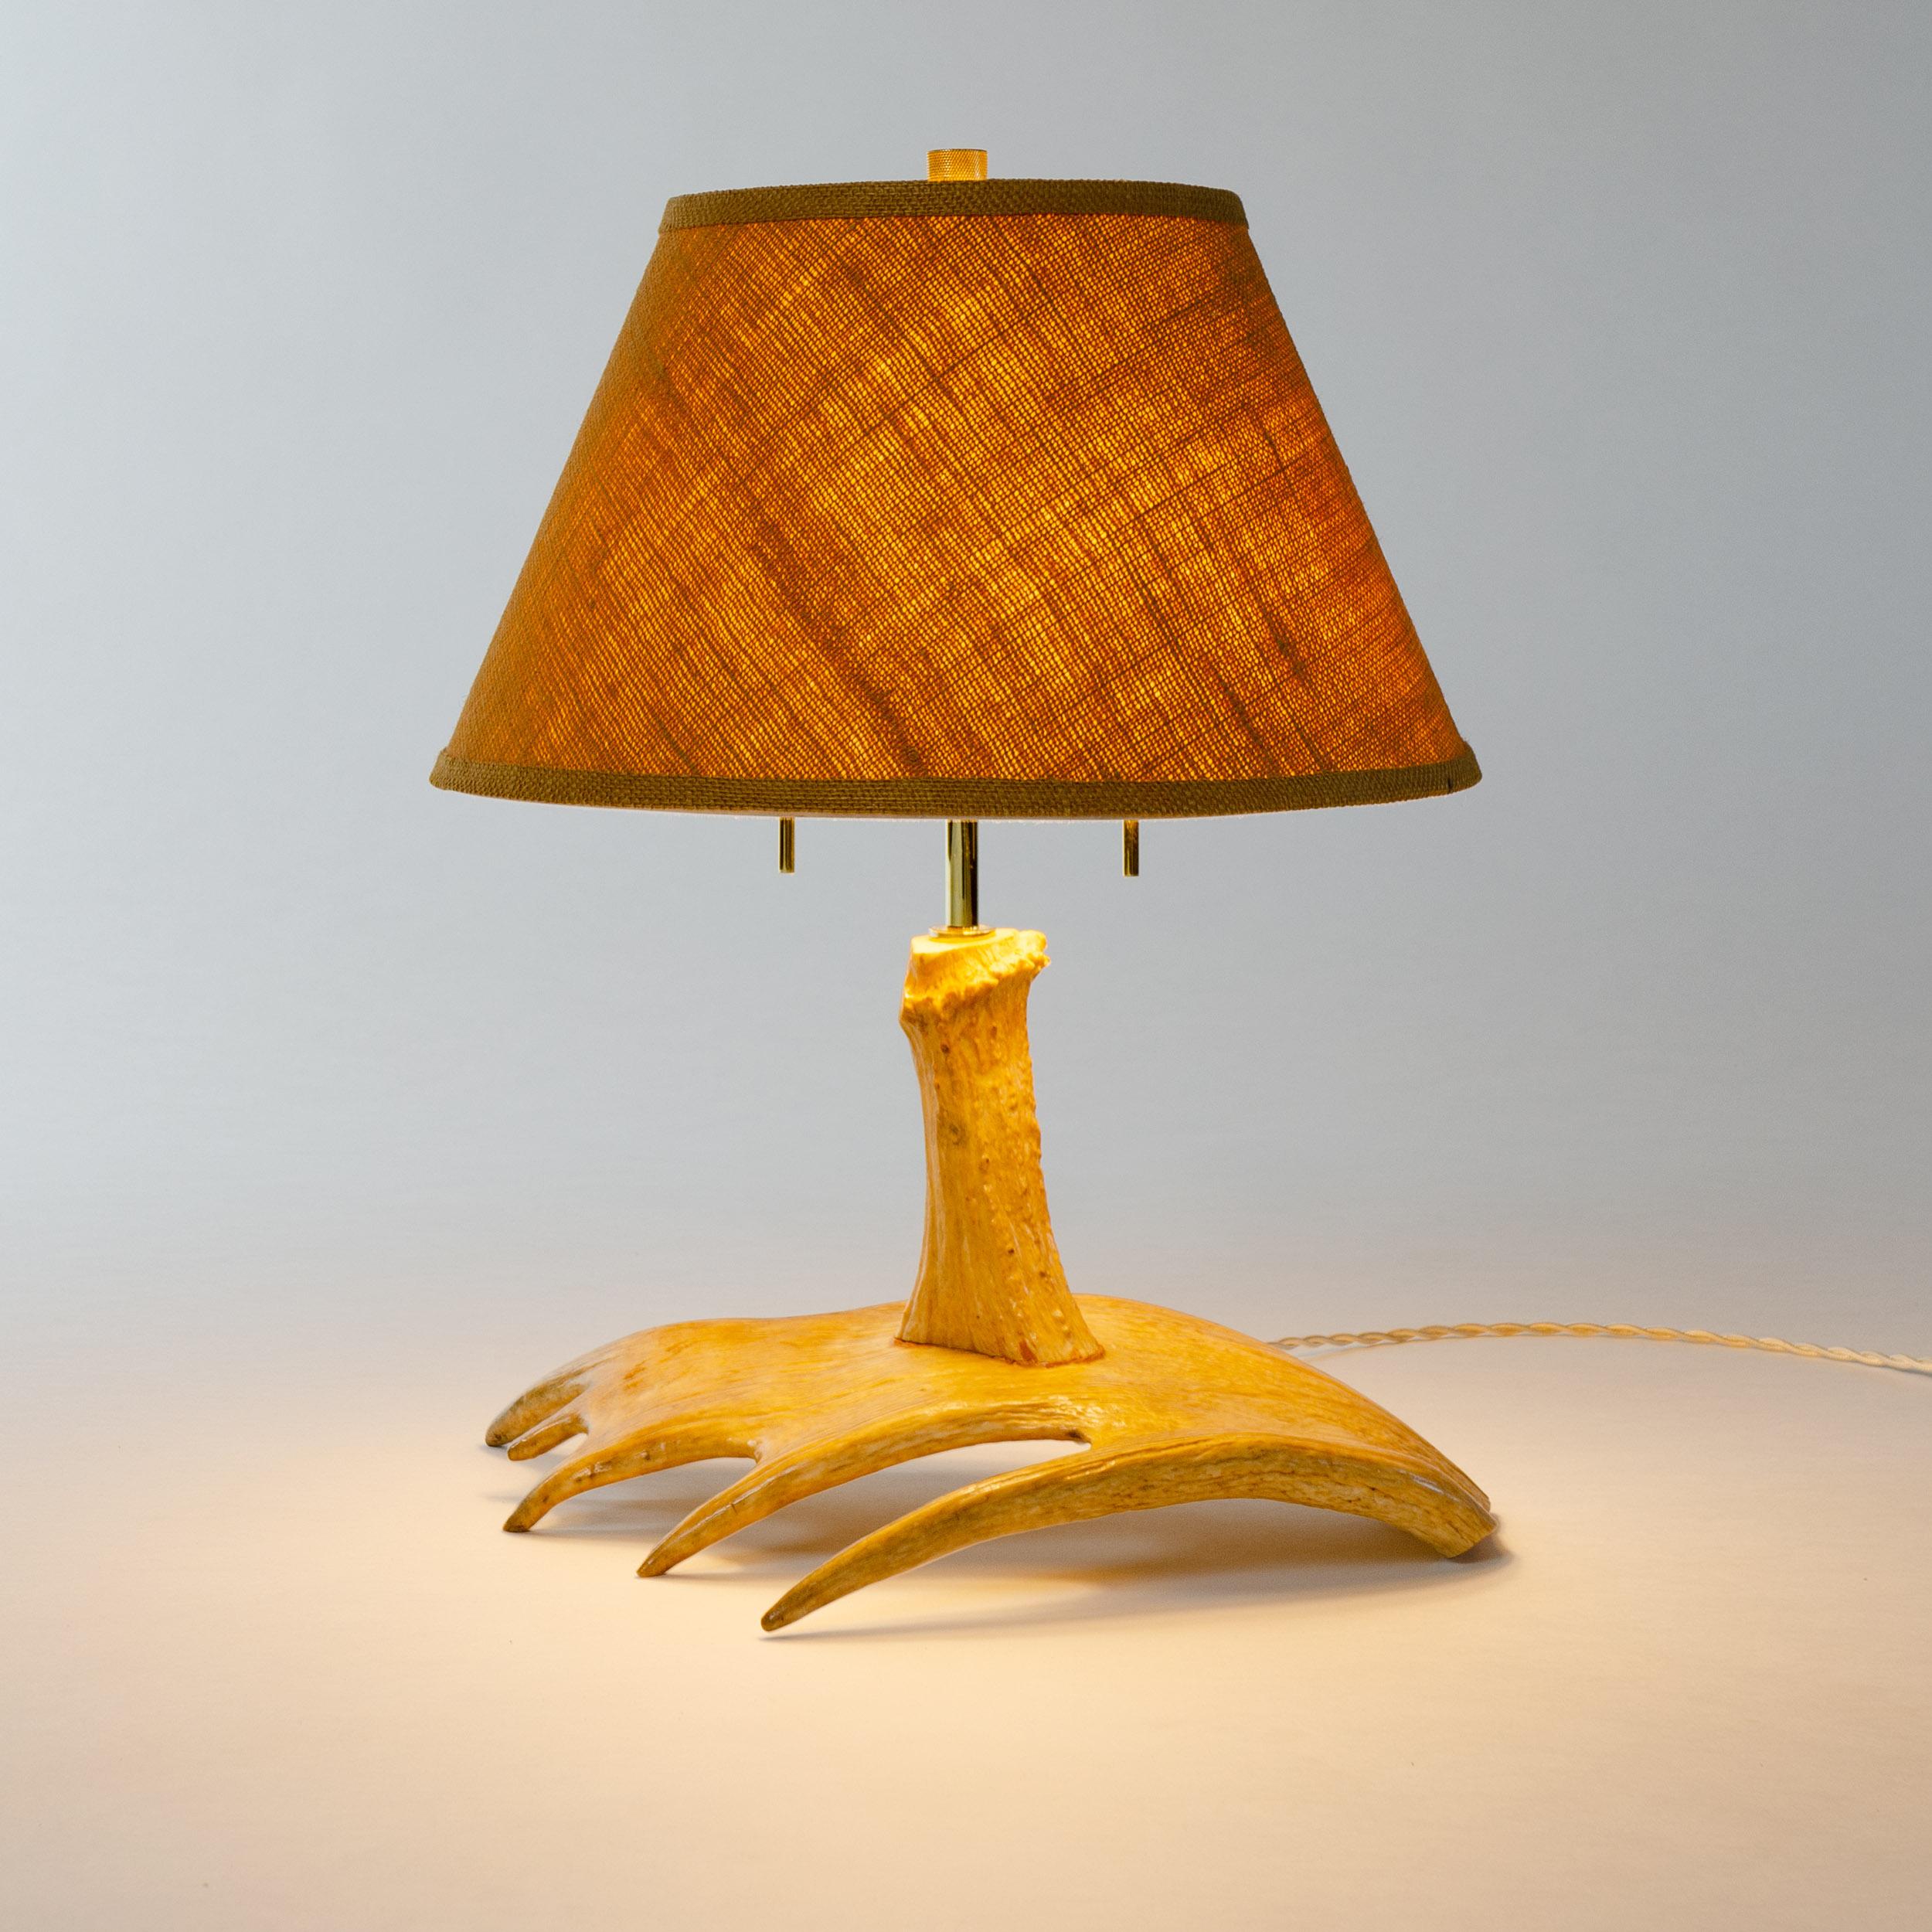 Unique, finely crafted, last quarter of the 20th century lighting device modeled from a moose antler, specifically the five point palm of the antler forms the wide base sitting beneath a thick, single antler tine mounted vertically to support the